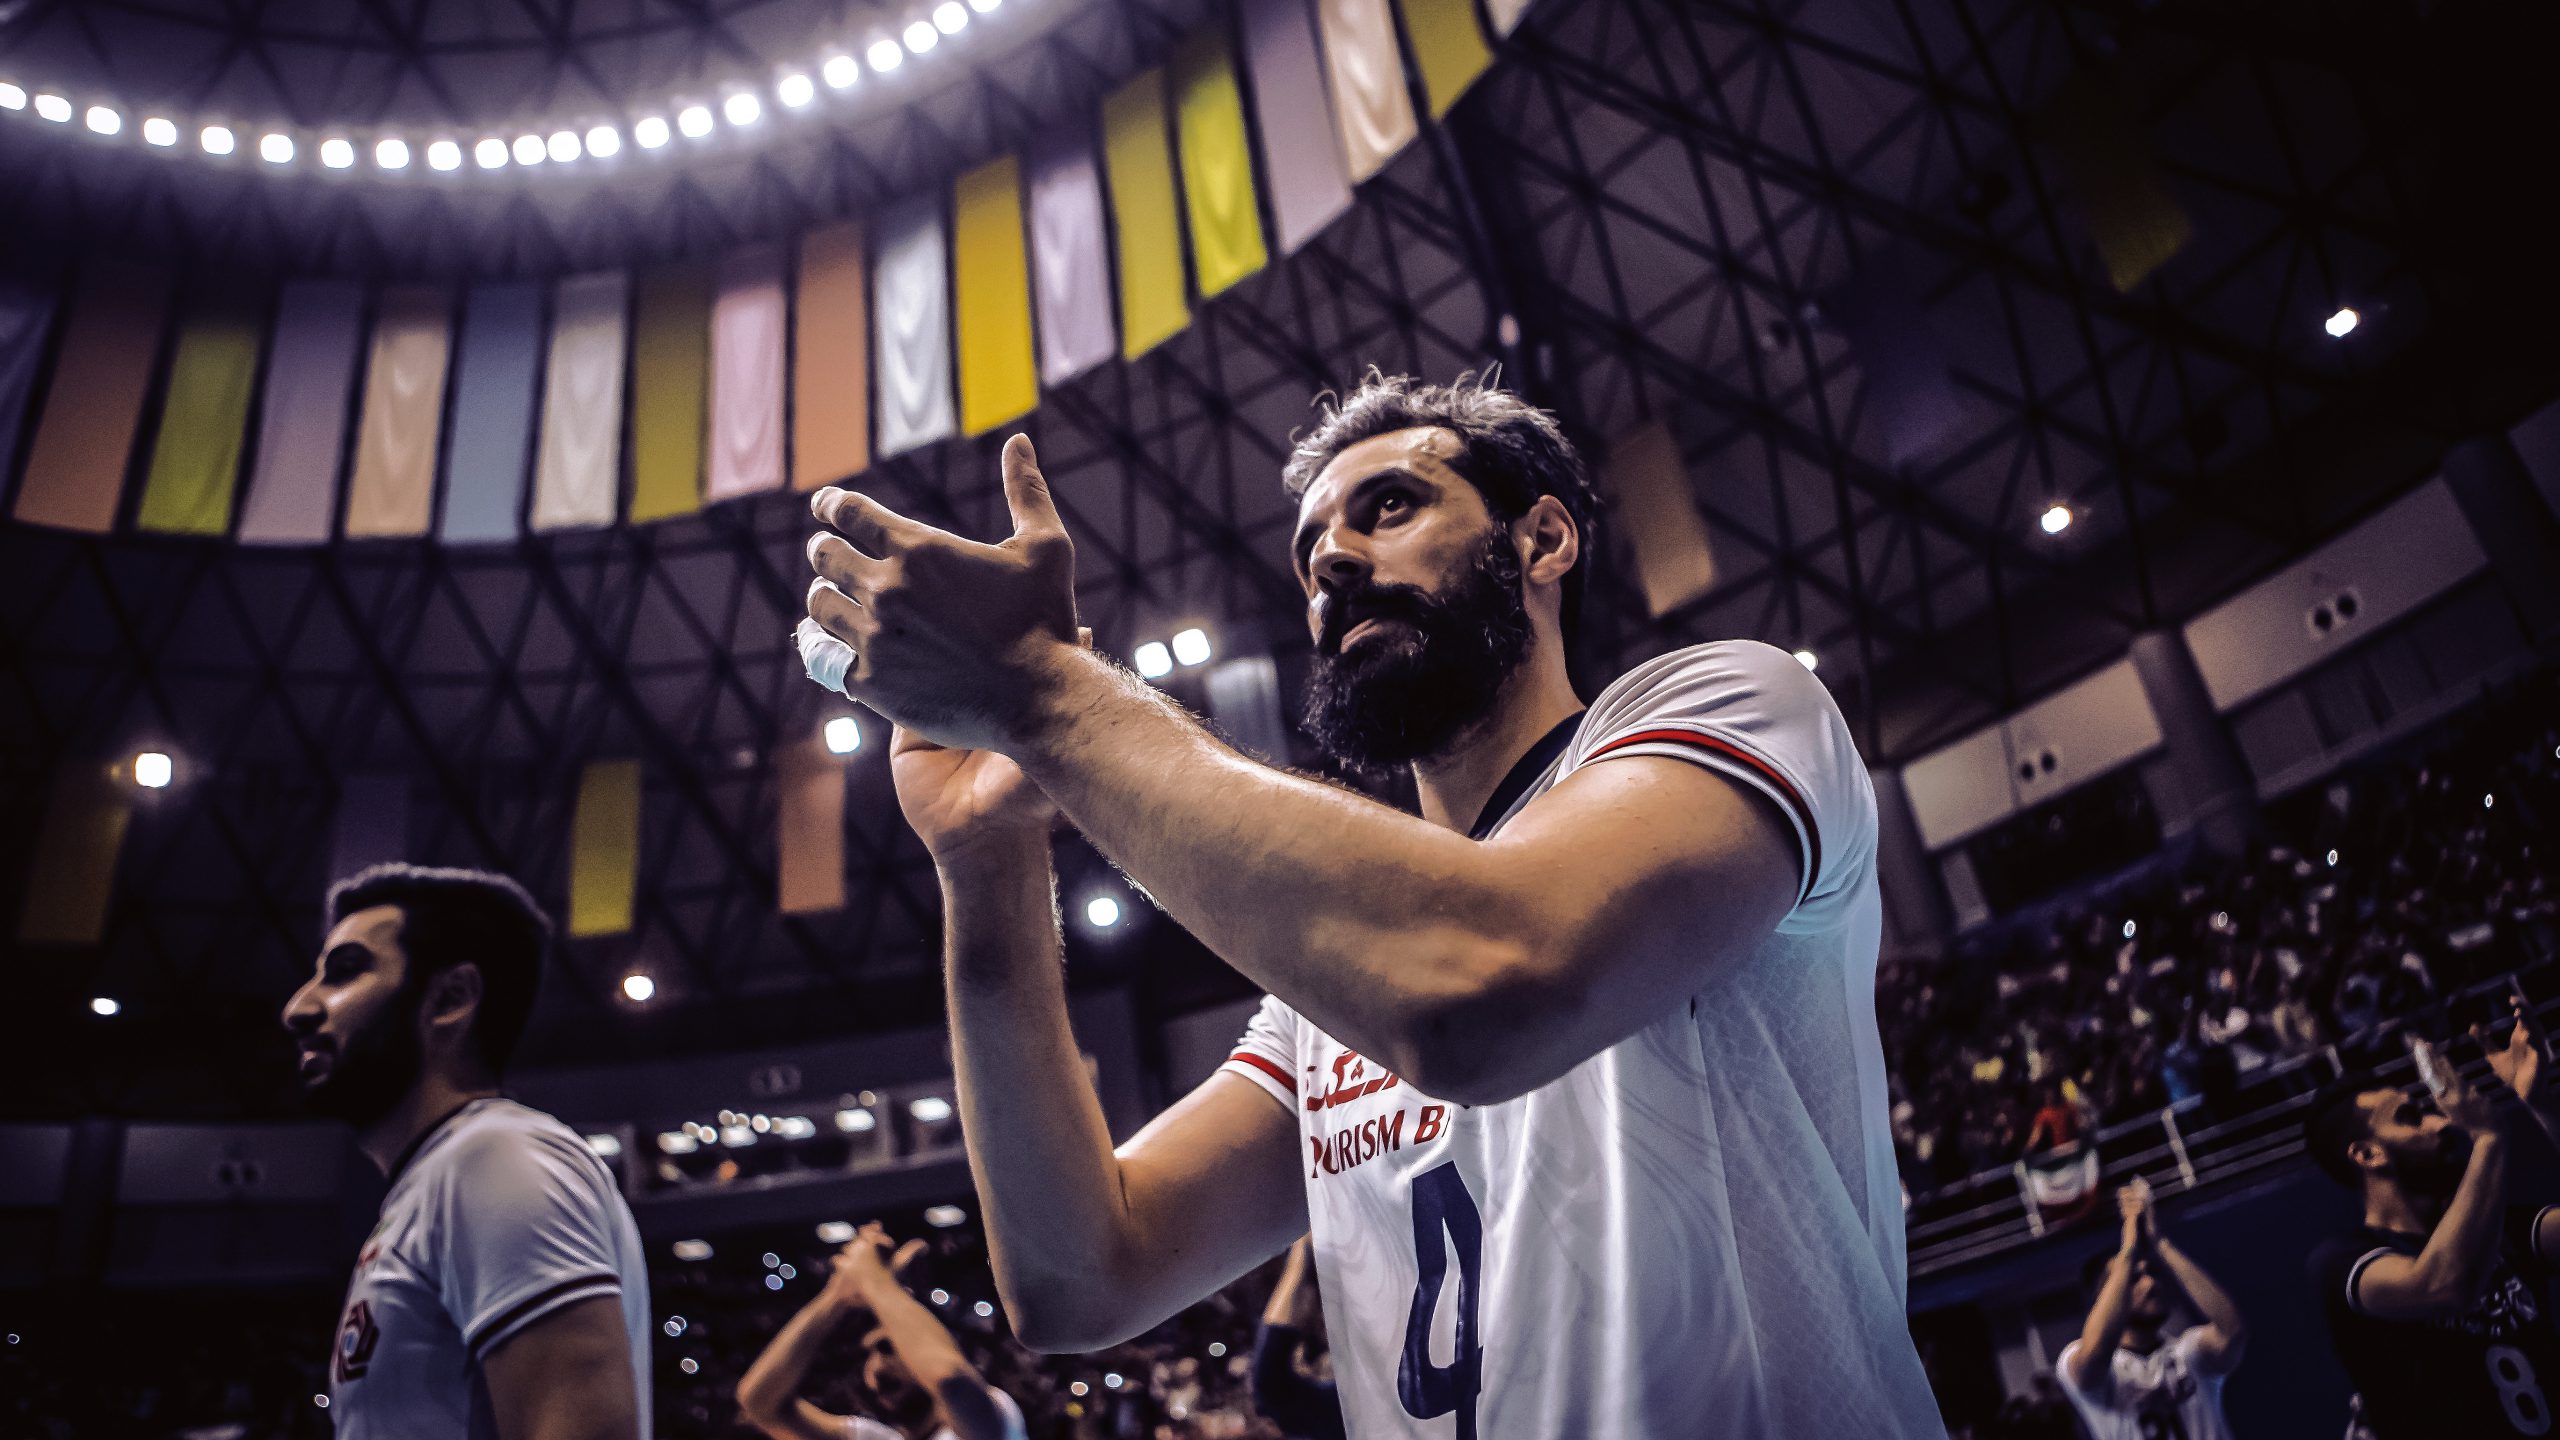 SAEID MAROUF: THE MASTER OF HIS GAME